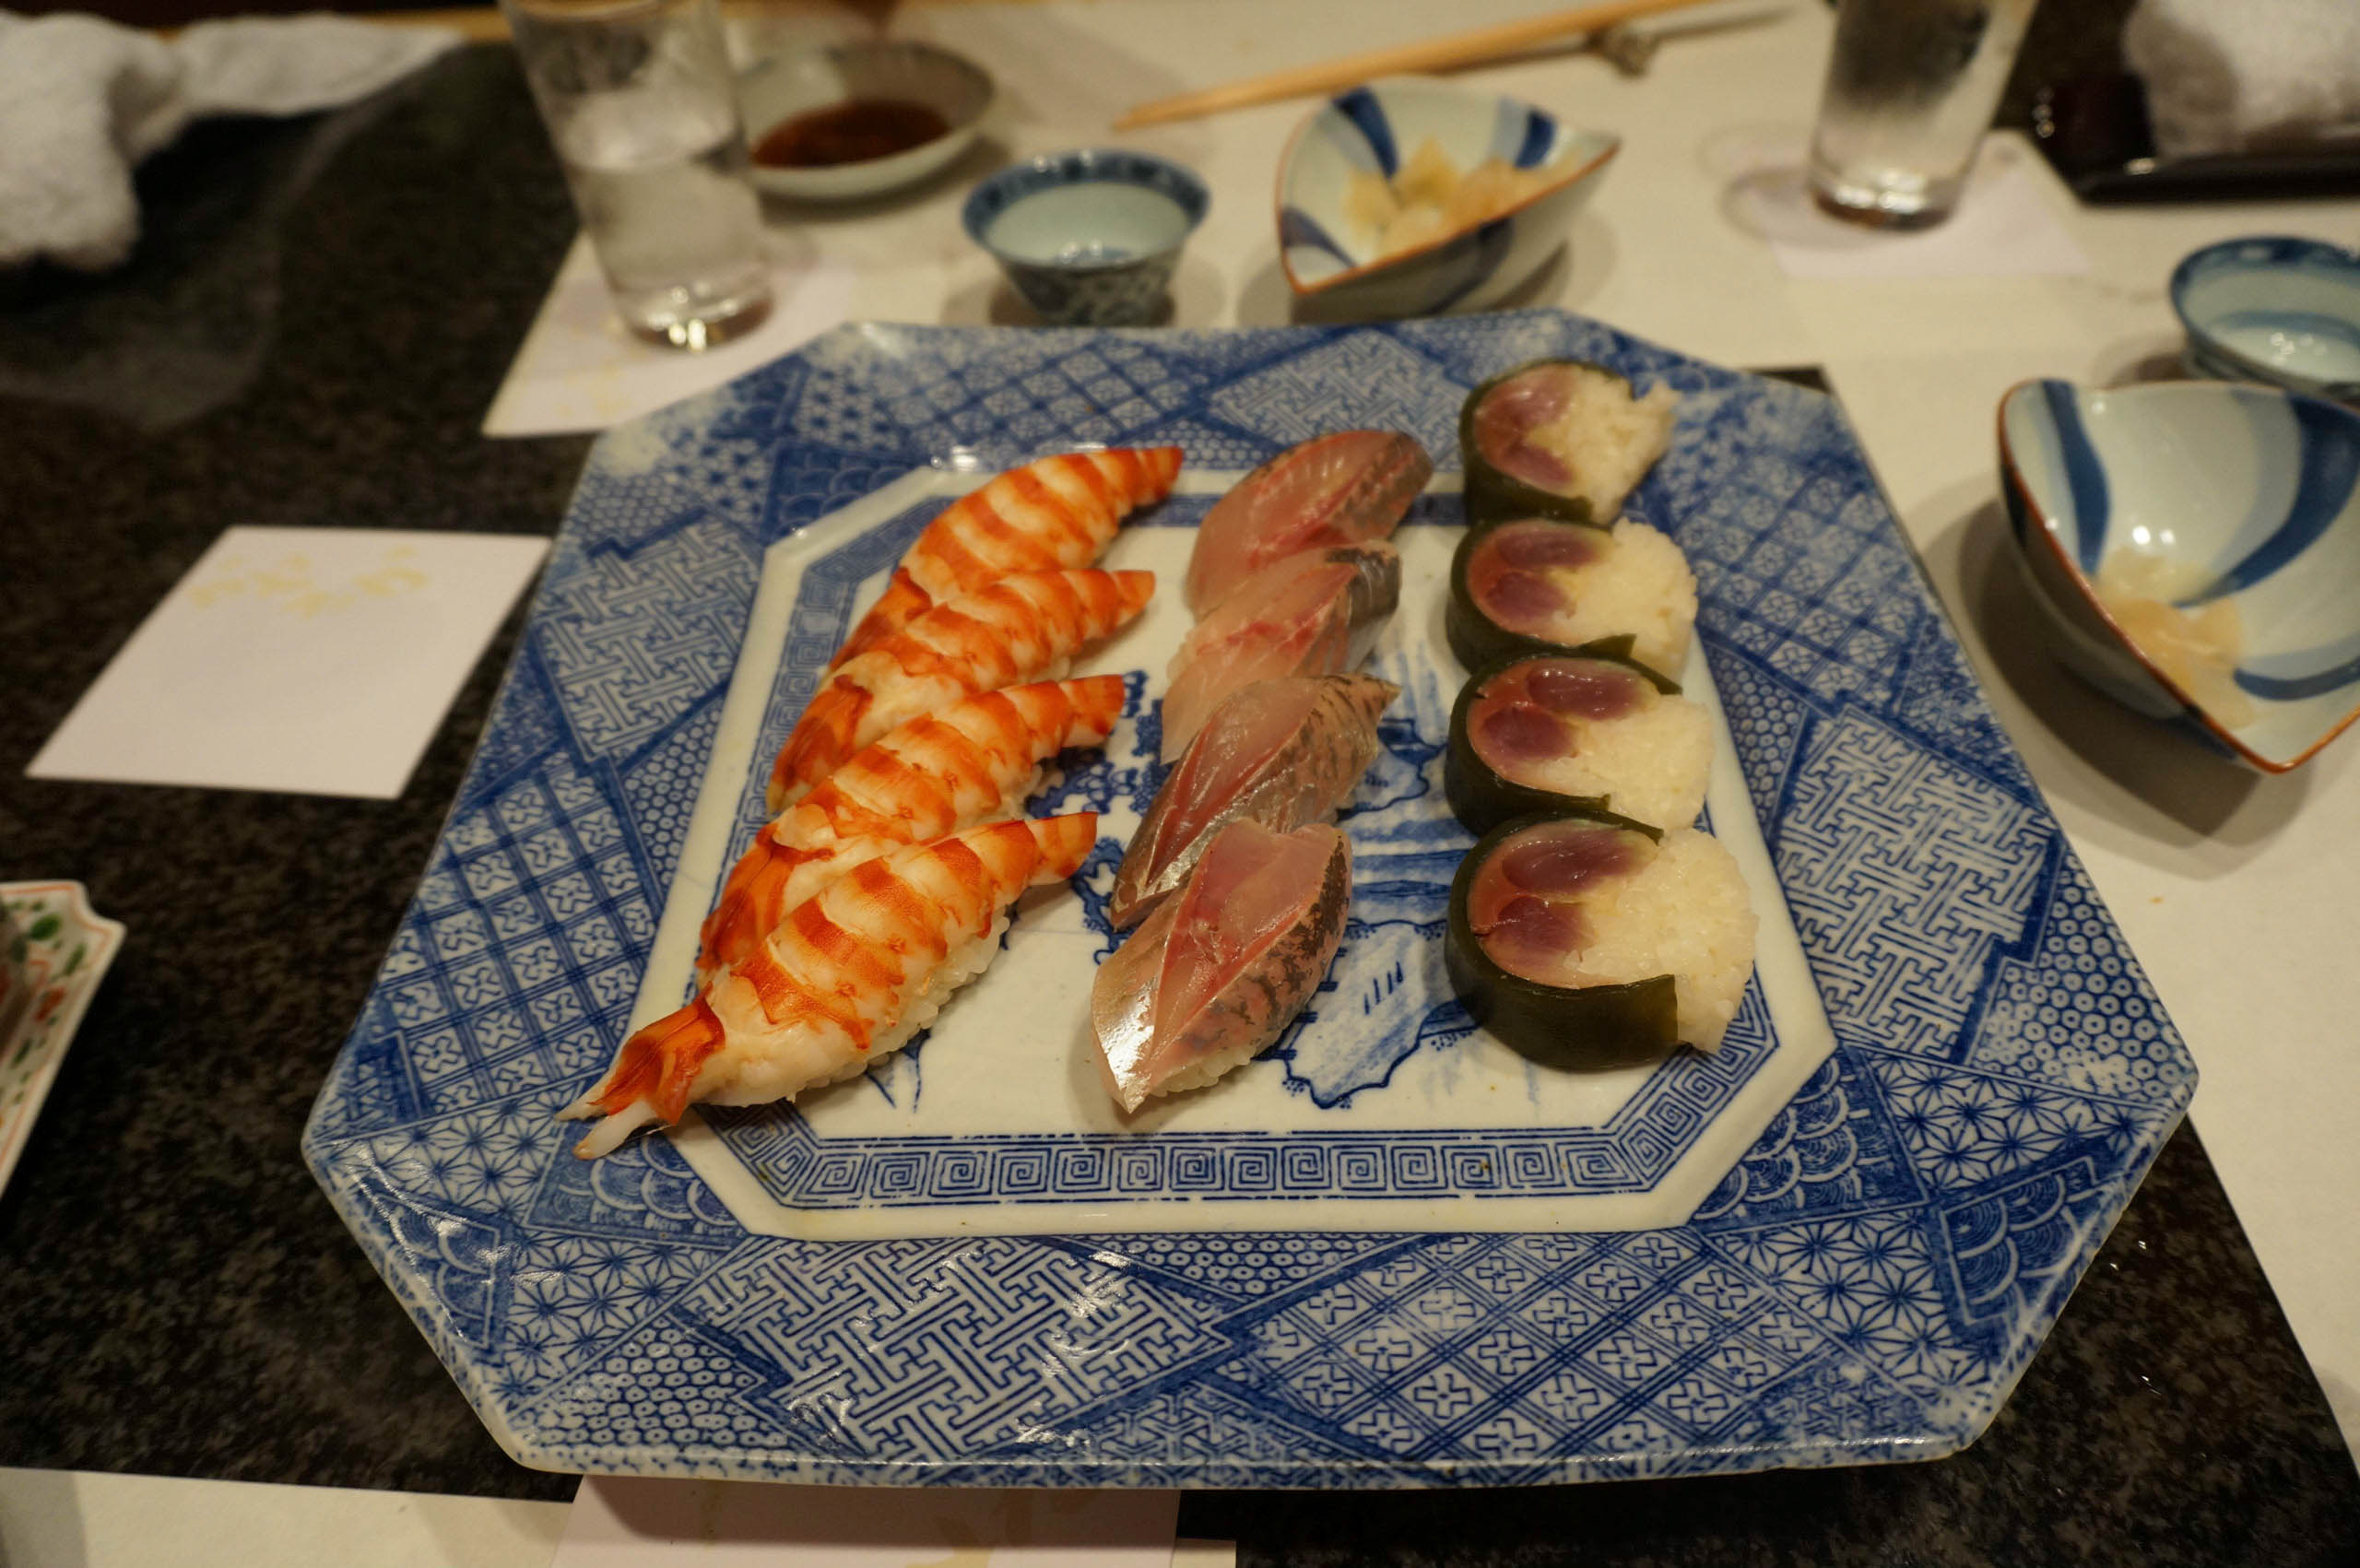 Shrimp and Anchovy Sushi accompanied by a unique Tuna Roll